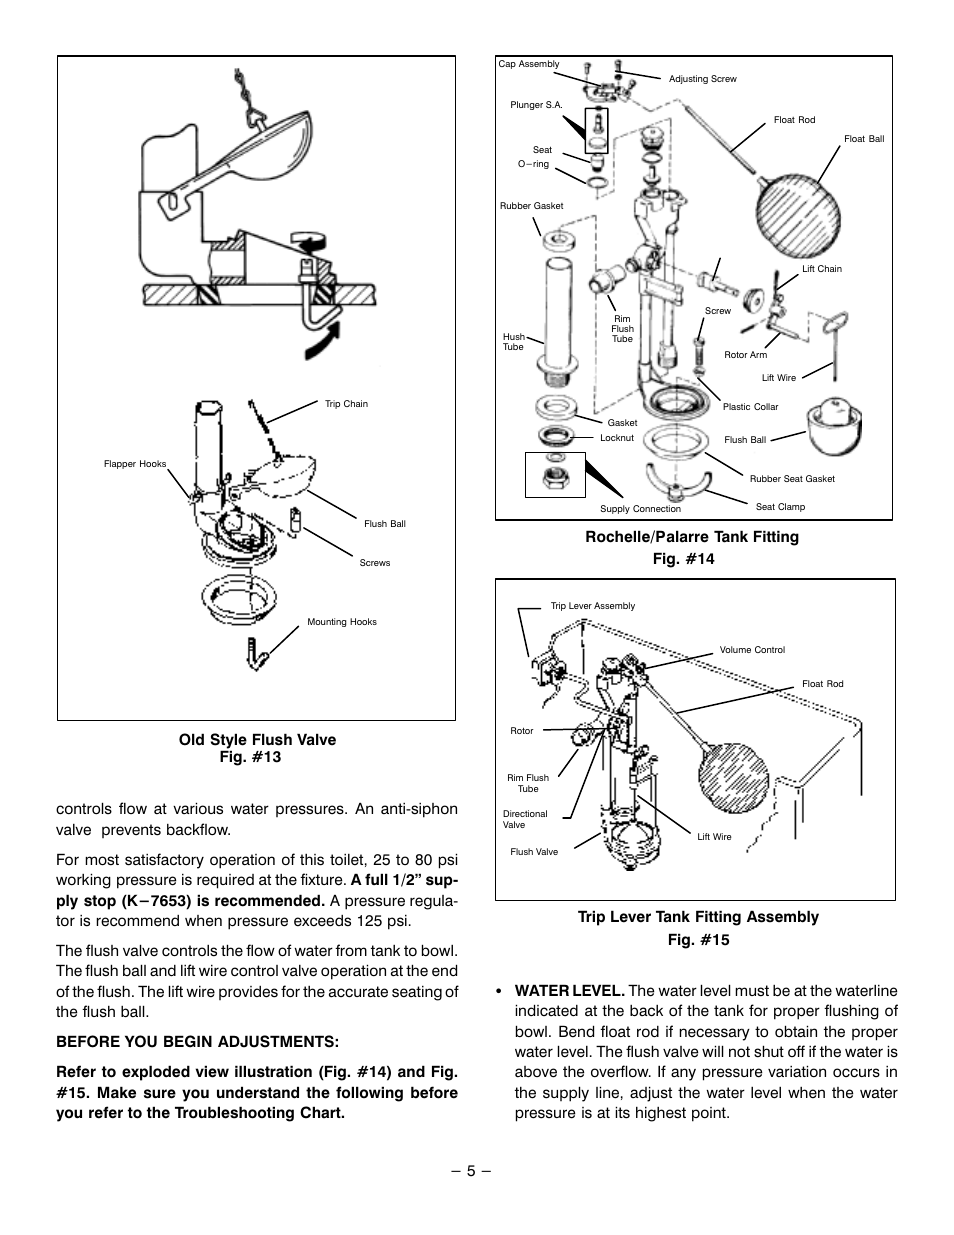 5 - old style flush valve fig. #13, Rochelle/palarre tank fitting fig. #14,  Trip lever tank fitting assembly fig. #15 | Kohler SIPHON VORTEX LOW  PROFILE ONE-PIECE TOILETS K-3402-EB User Manual | Page 5 / 12 | Original  mode